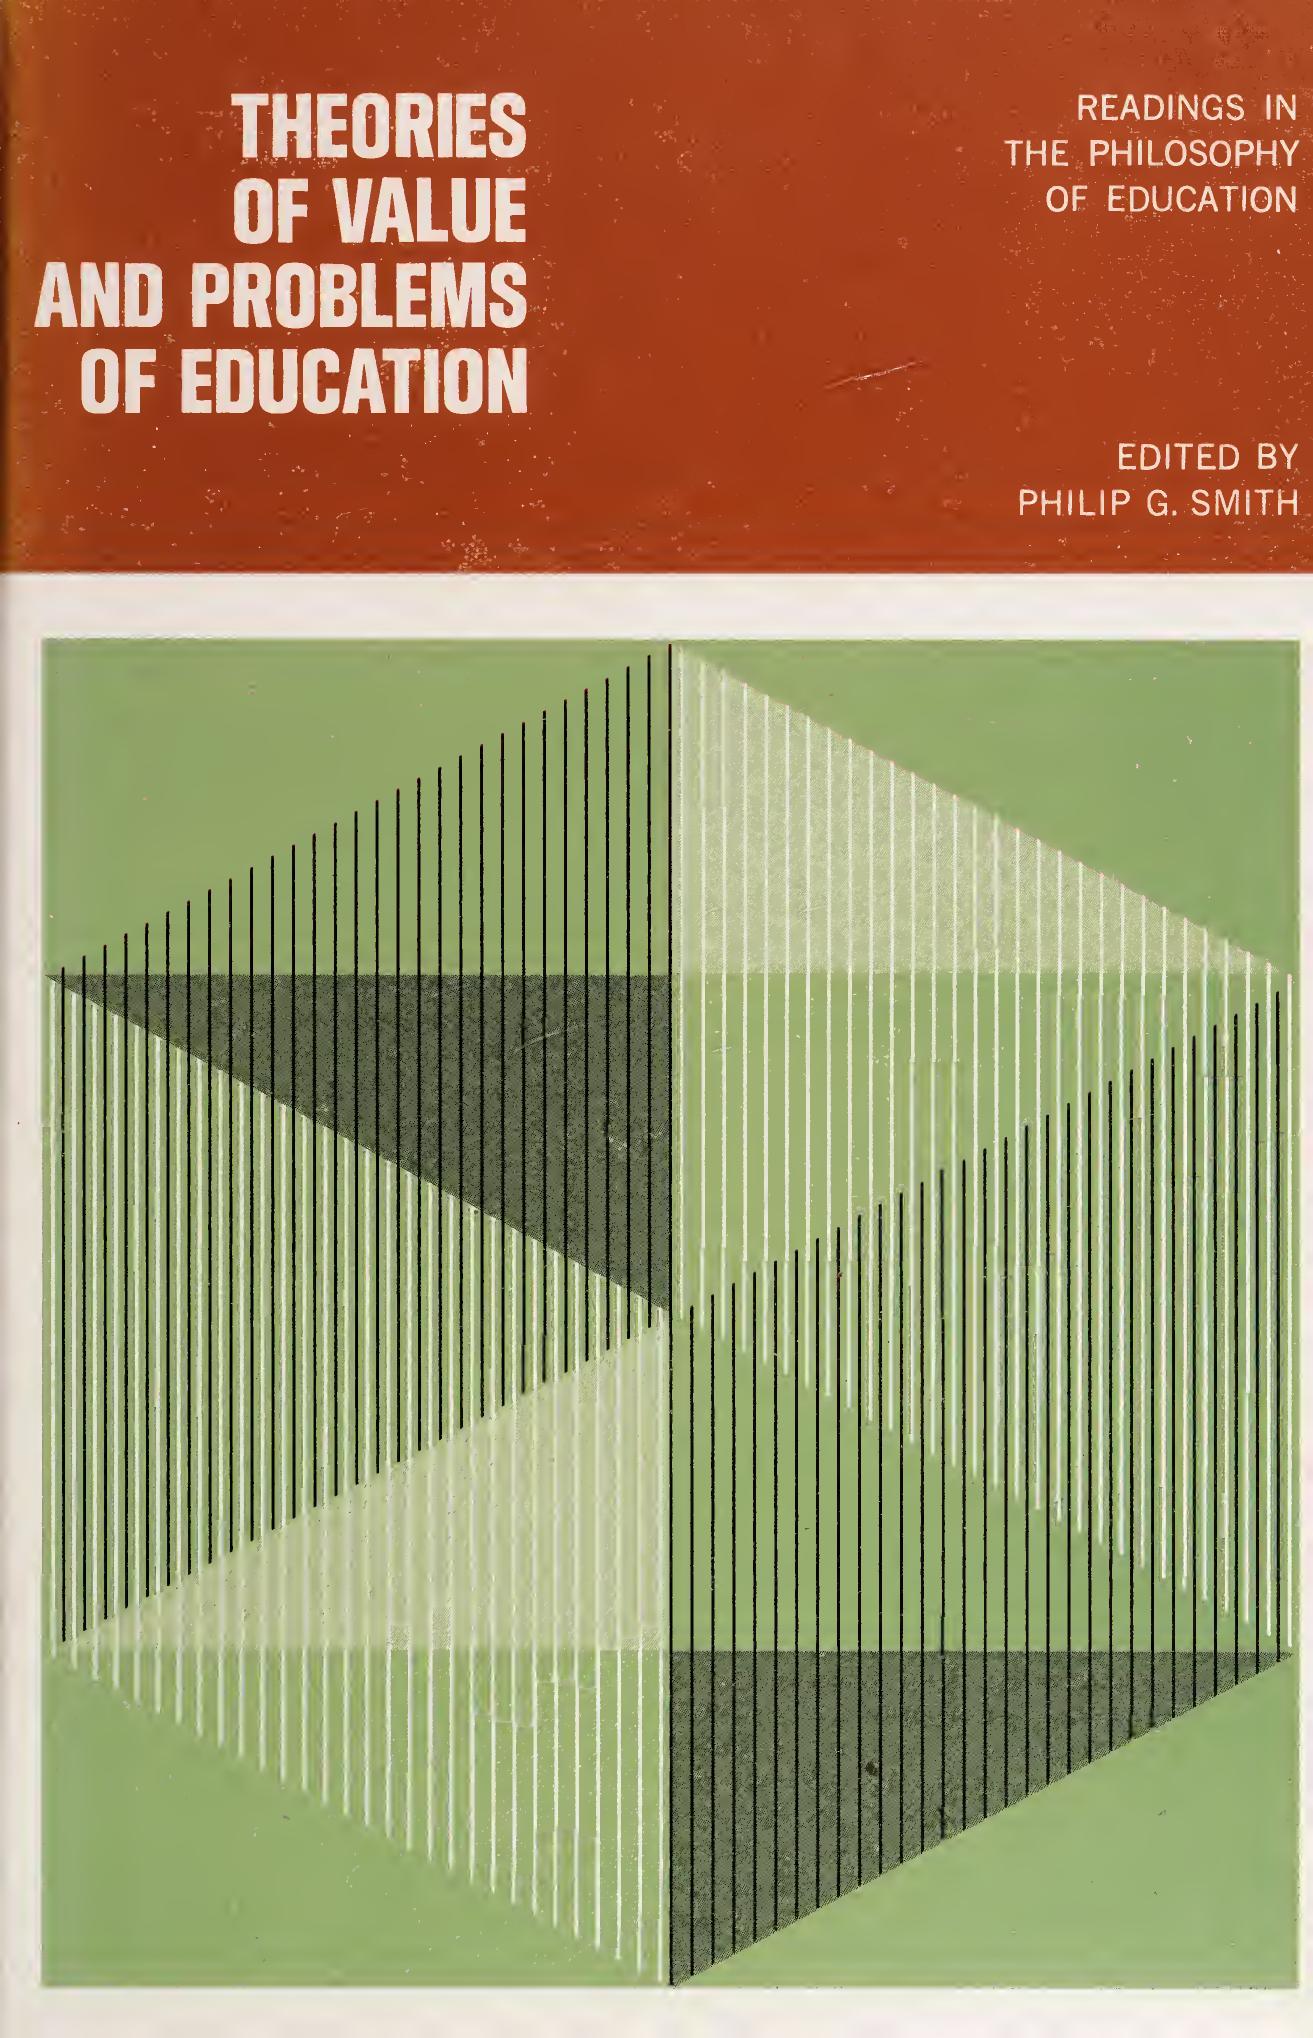 Theories of Value and Problems of Education